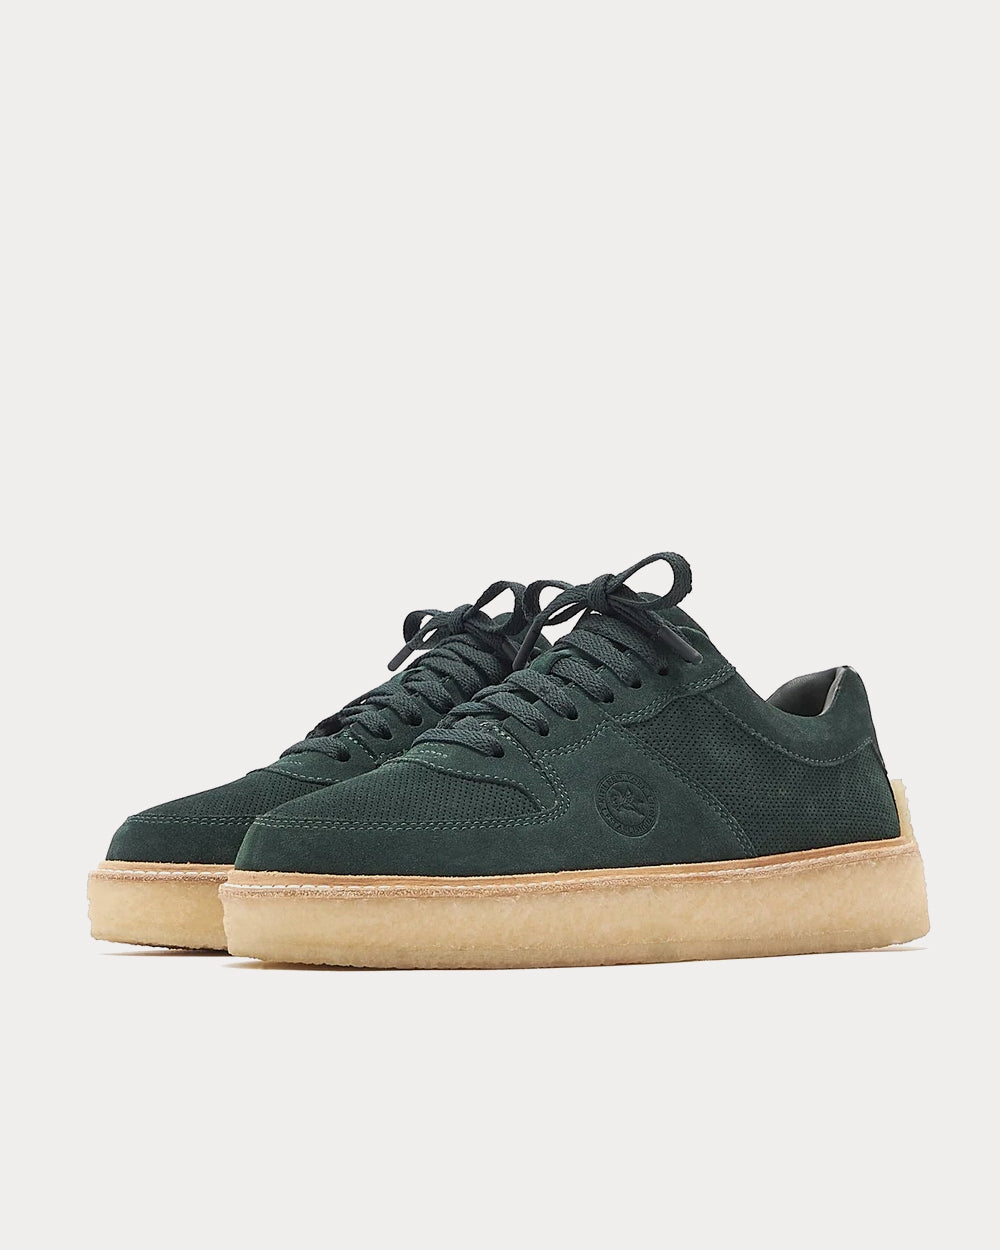 Clarks x Kith - Lockhill Suede Dark Teal Low Top Sneakers